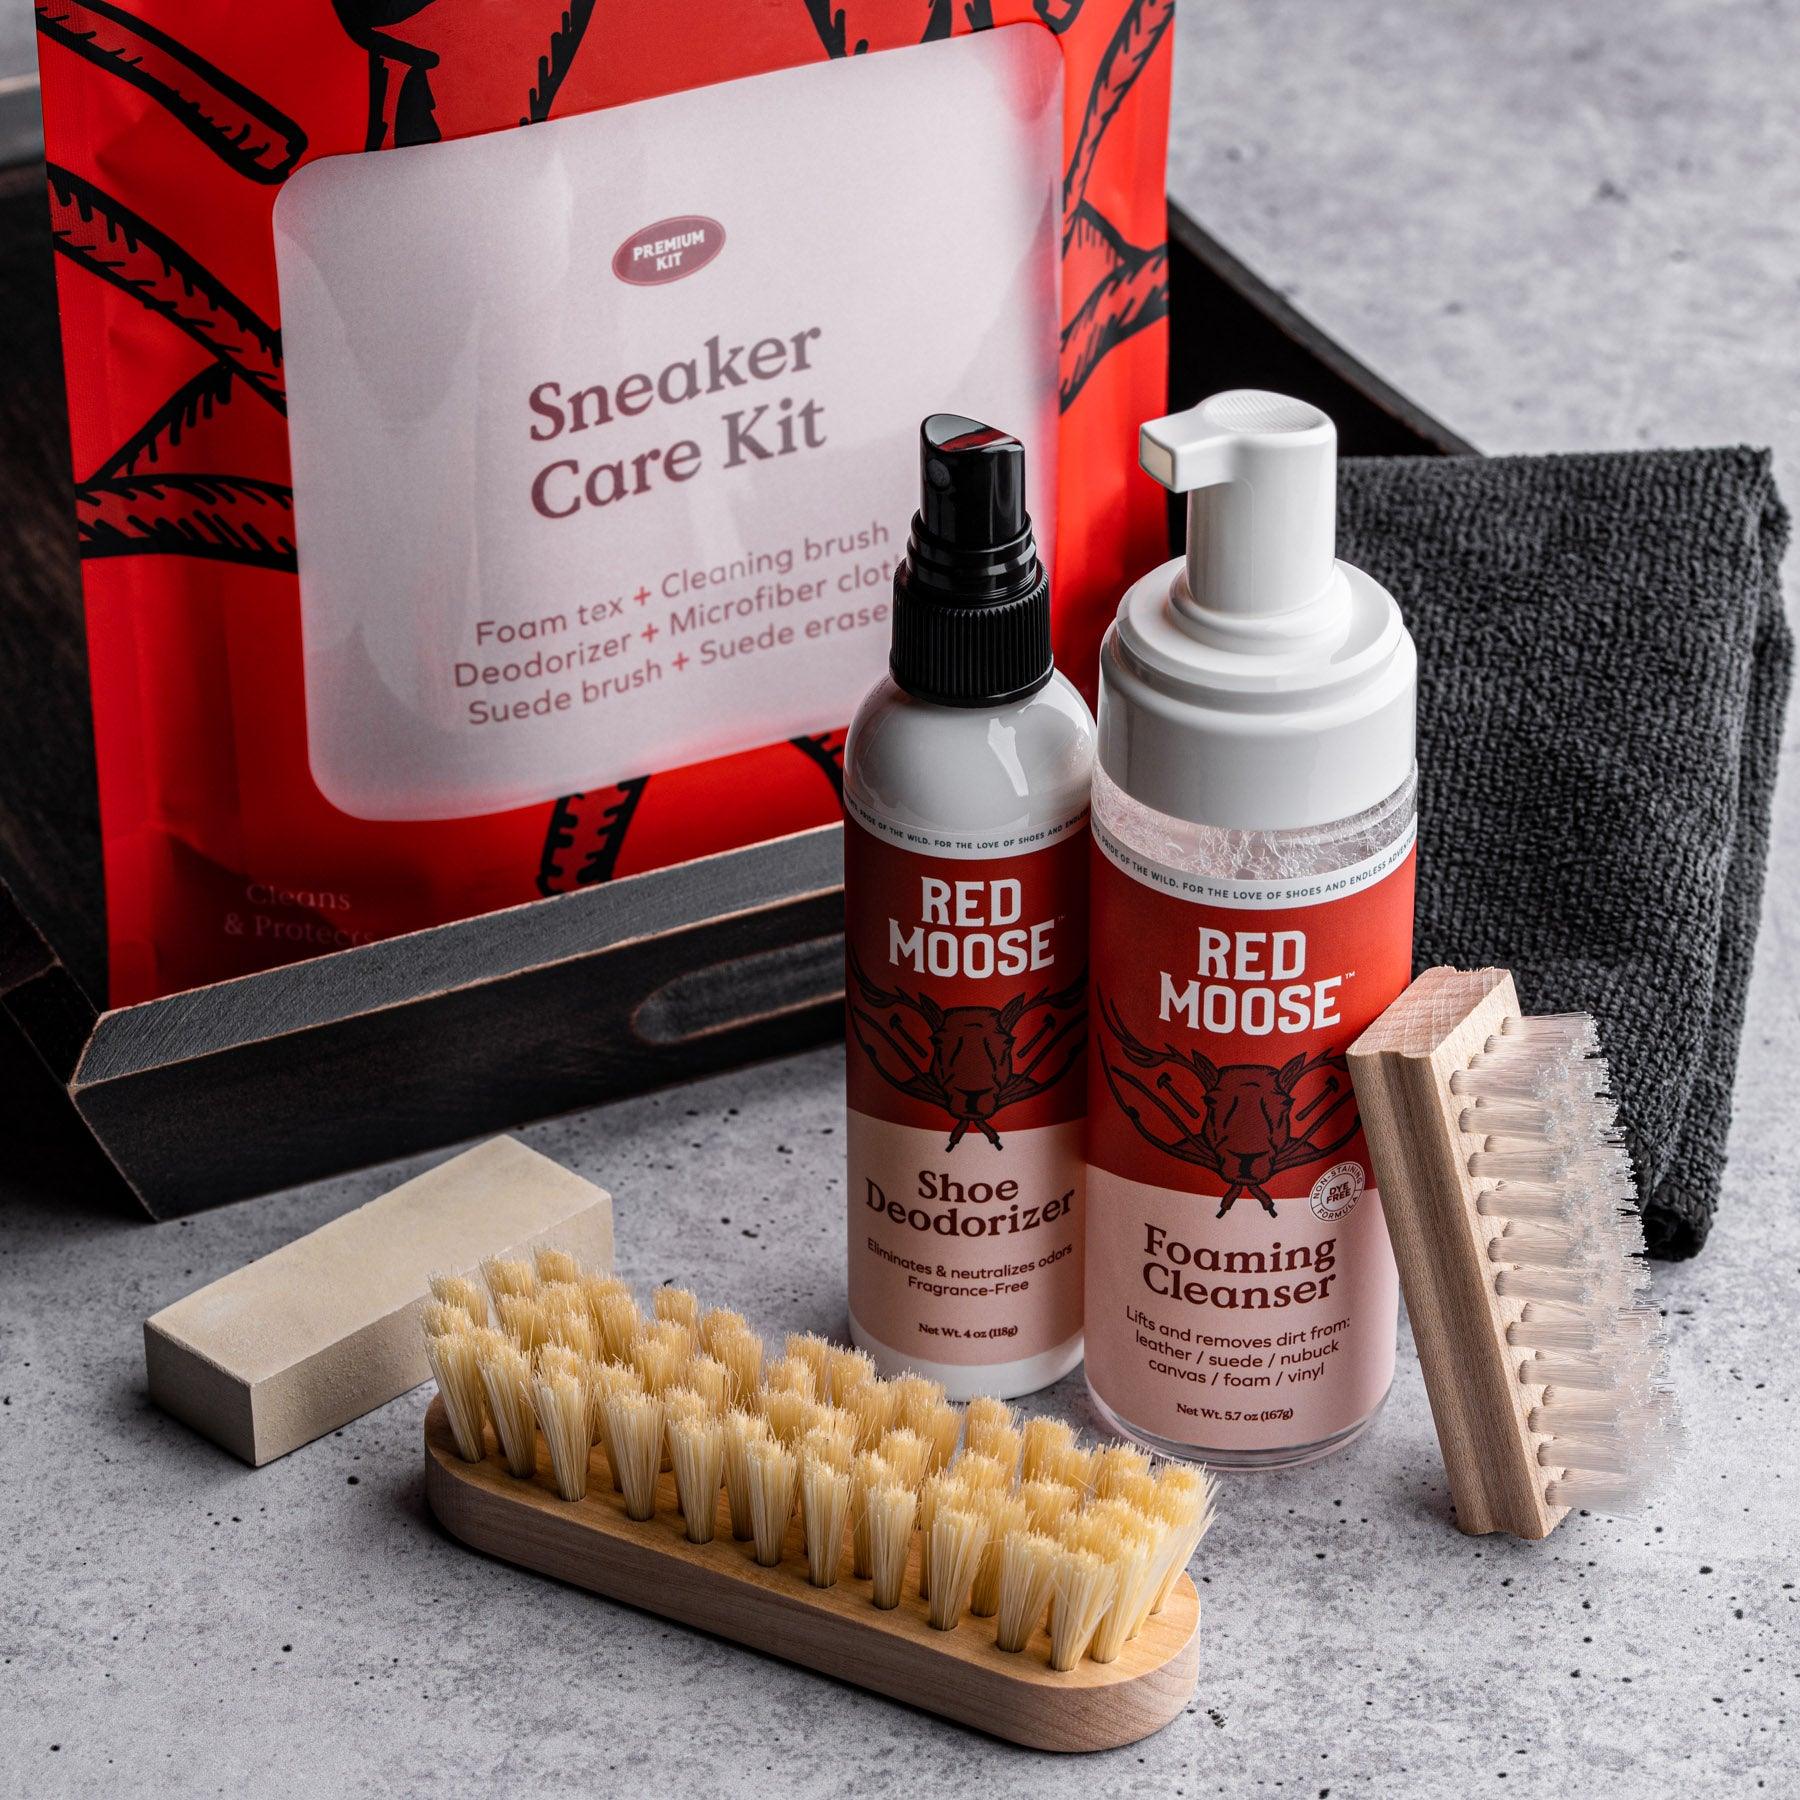 Buy Sneaker Cleaning Brush Online to Keep Shoes Clean | SNKR Essentials